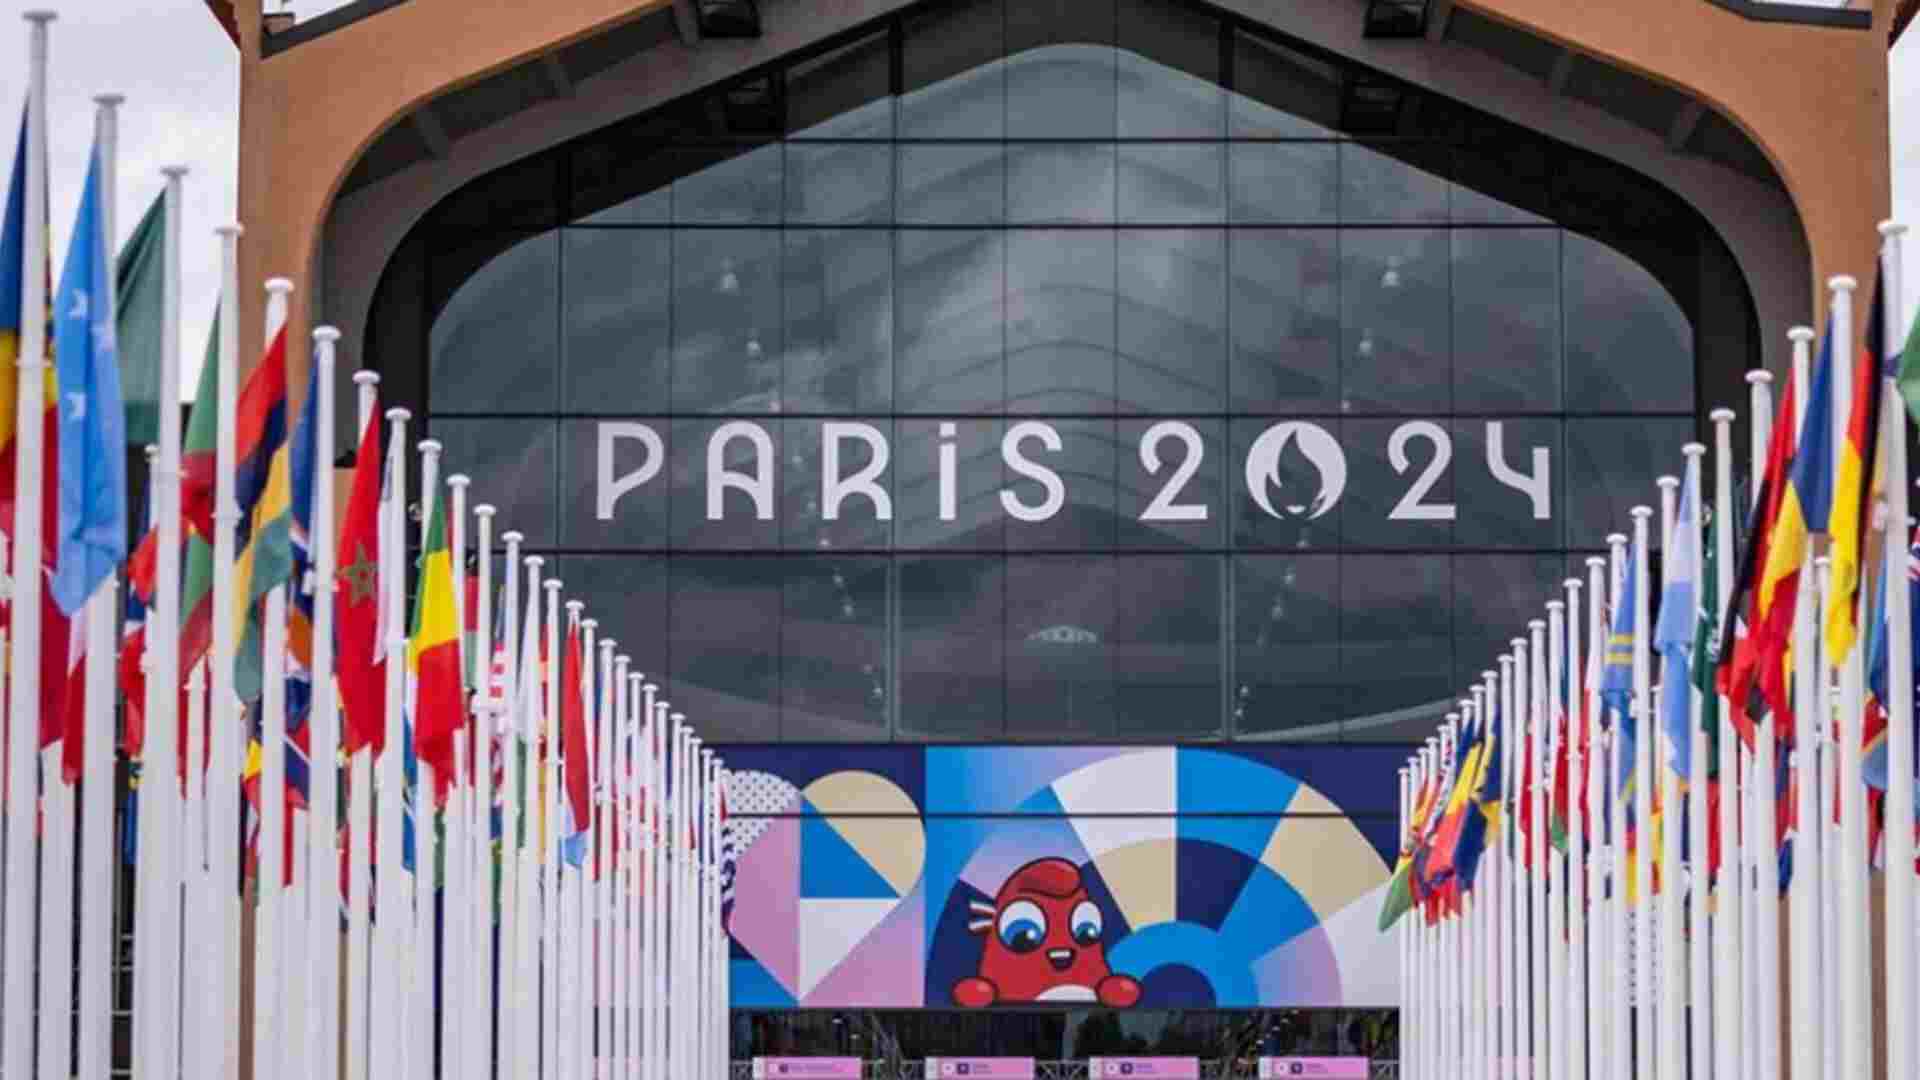 Paris Olympics 2024: Grindr App Banned Within Olympic Village, Here’s Why